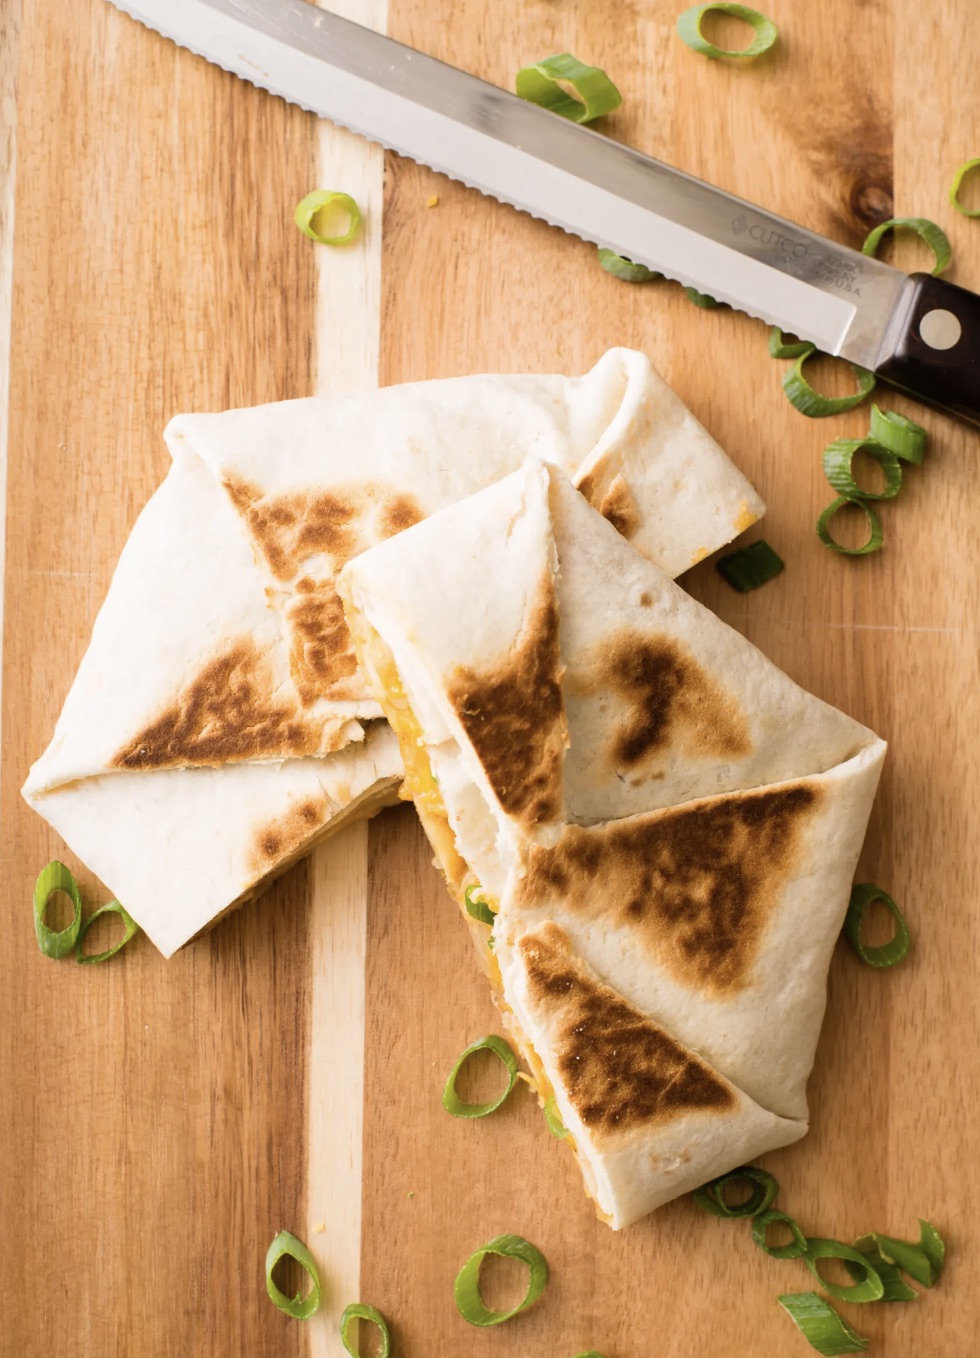 Meals under $10: Chickpea and Cheddar Quesadillas by Kelli Foster for the Kitchn | Photo: Maria Siriano